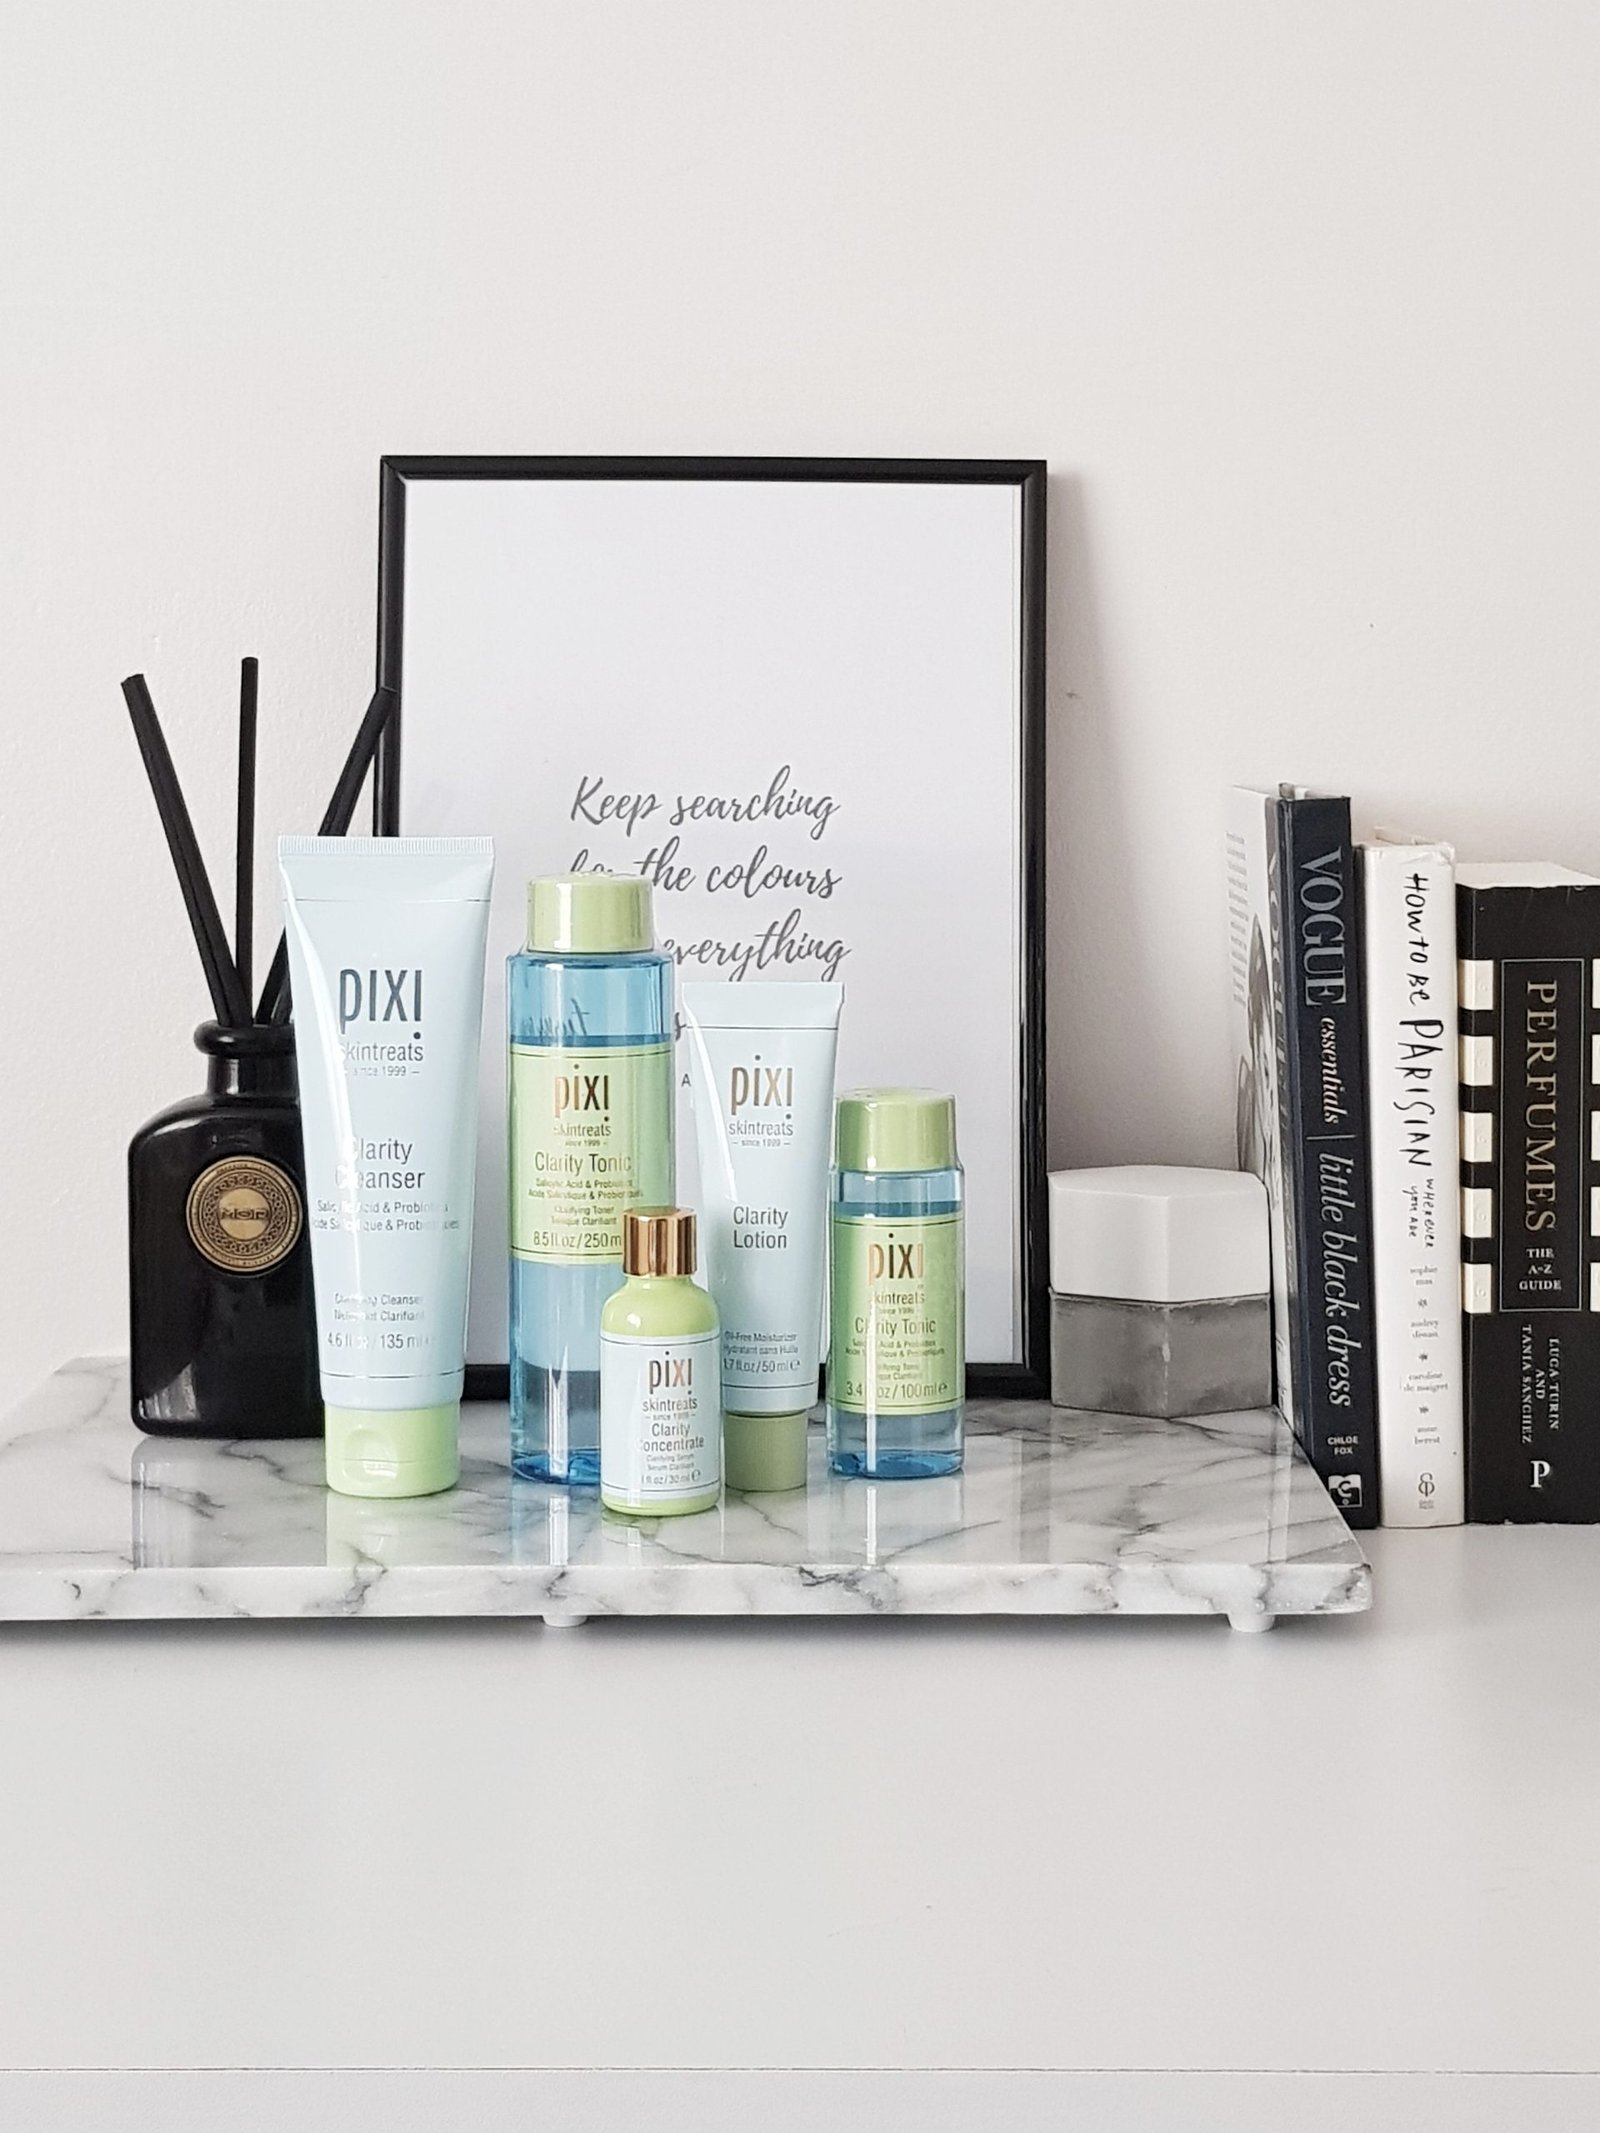 Congested Skin? No Problem, Pixi's NEW Clarity Range is for you!